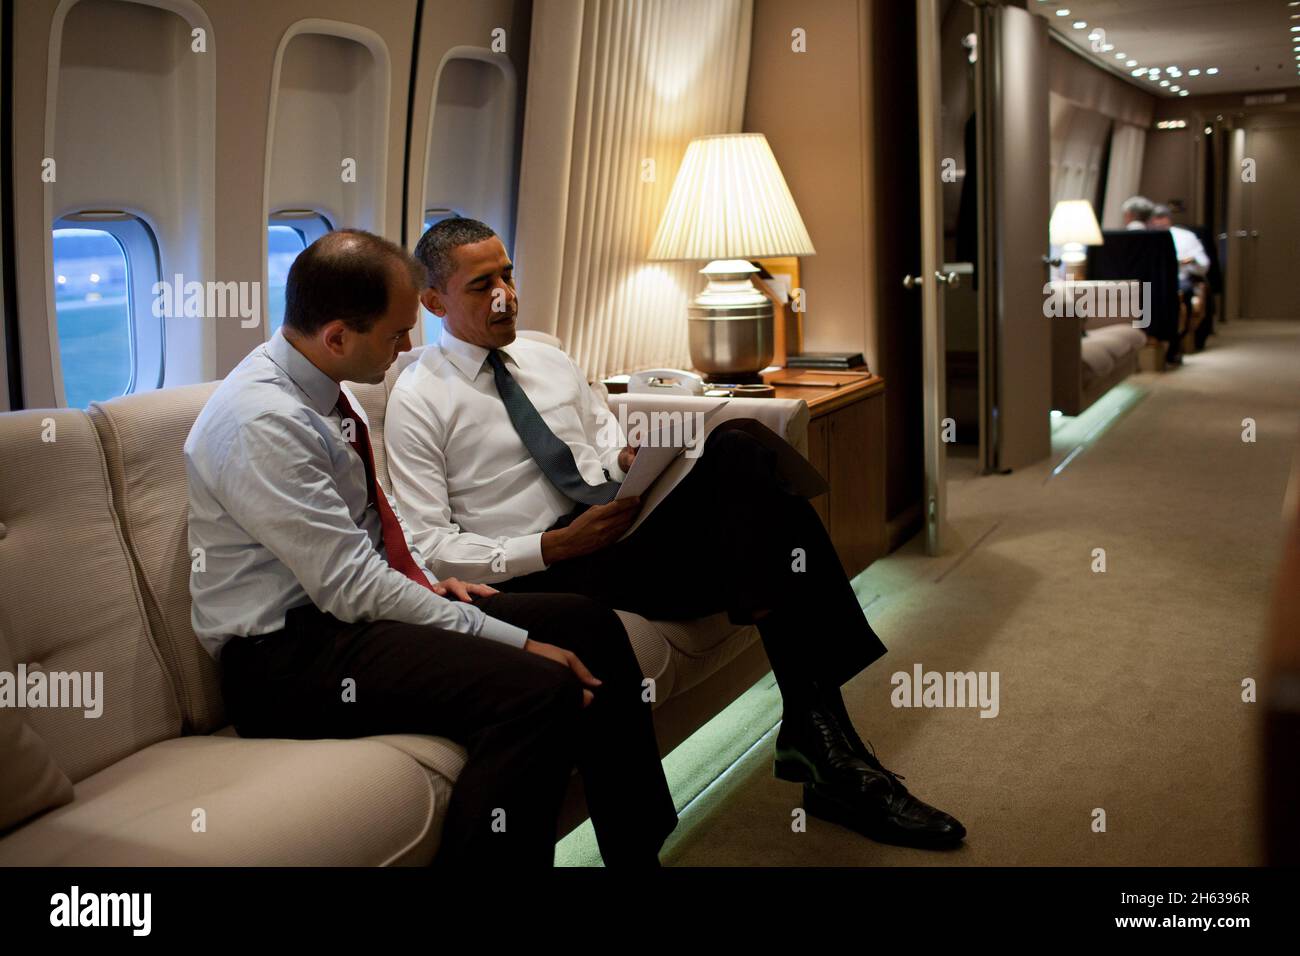 President Barack Obama talks with Ben Rhodes, Deputy National Security Advisor for Strategic Communications, aboard Air Force One en route to New York, N.Y., to commemorate the tenth anniversary of the 9/11 attacks against the United States, Sunday, Sept. 11, 2011. Stock Photo